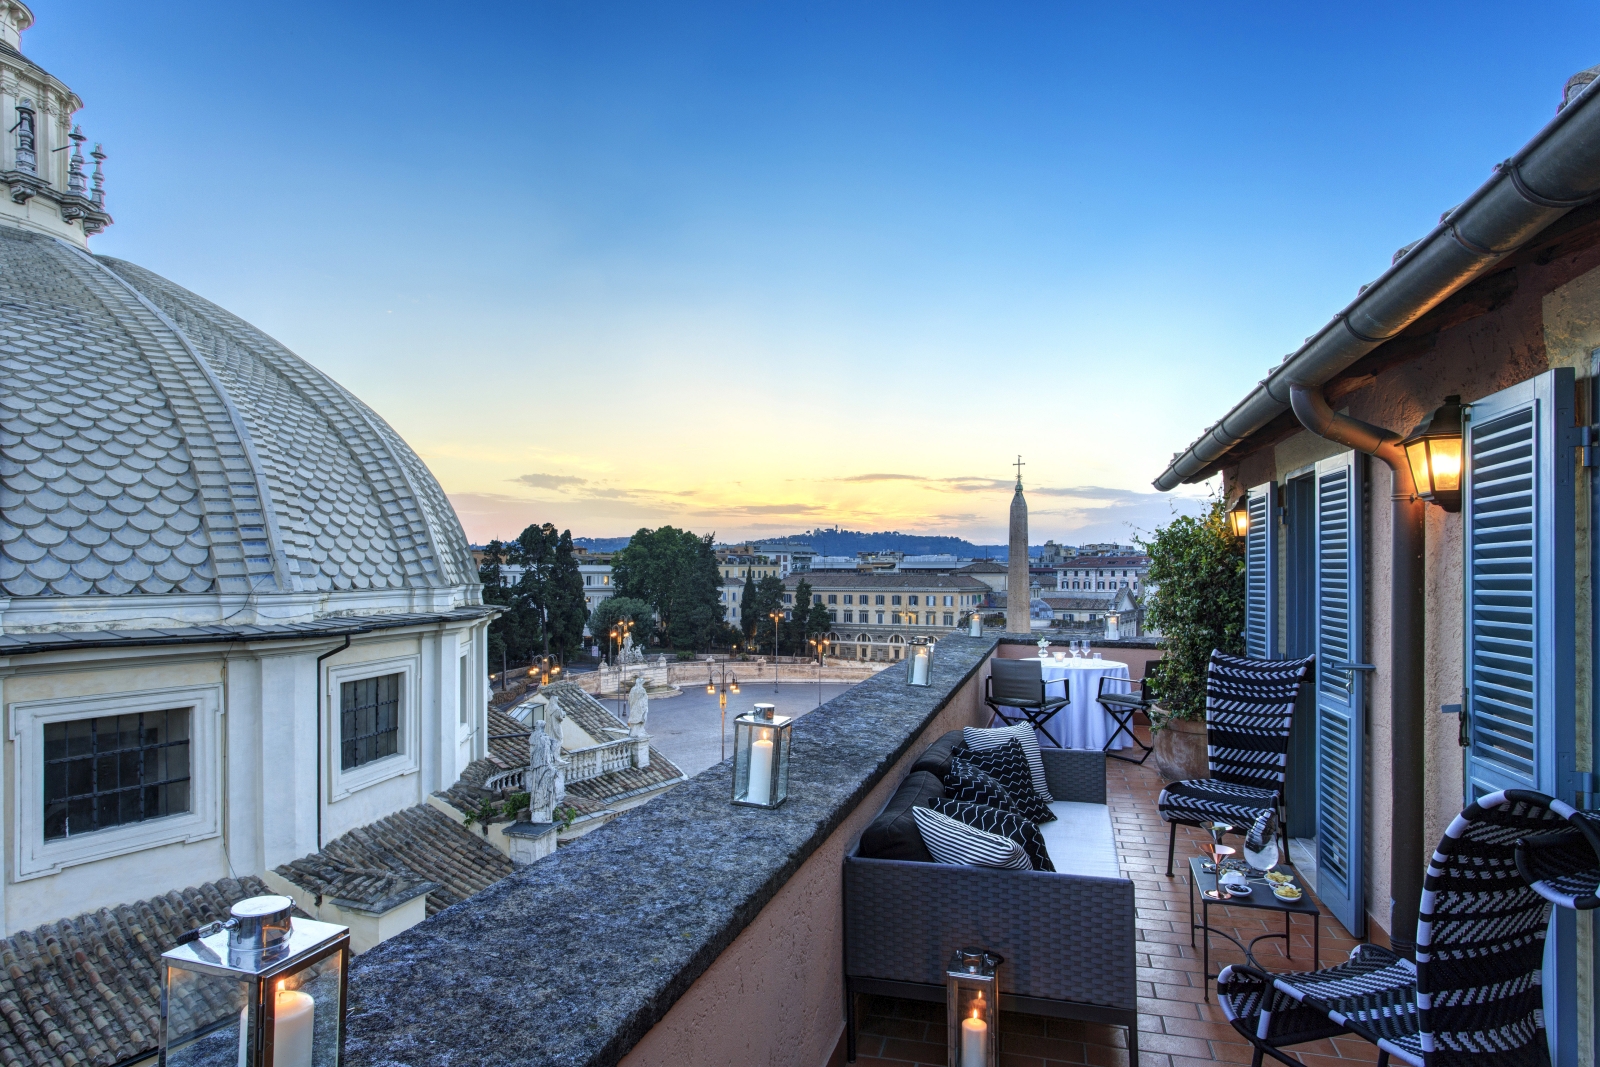 Terrace of the Popolo Suite overlooking the surrounding area at Hotel de Russie, luxury hotel in Rome, Italy